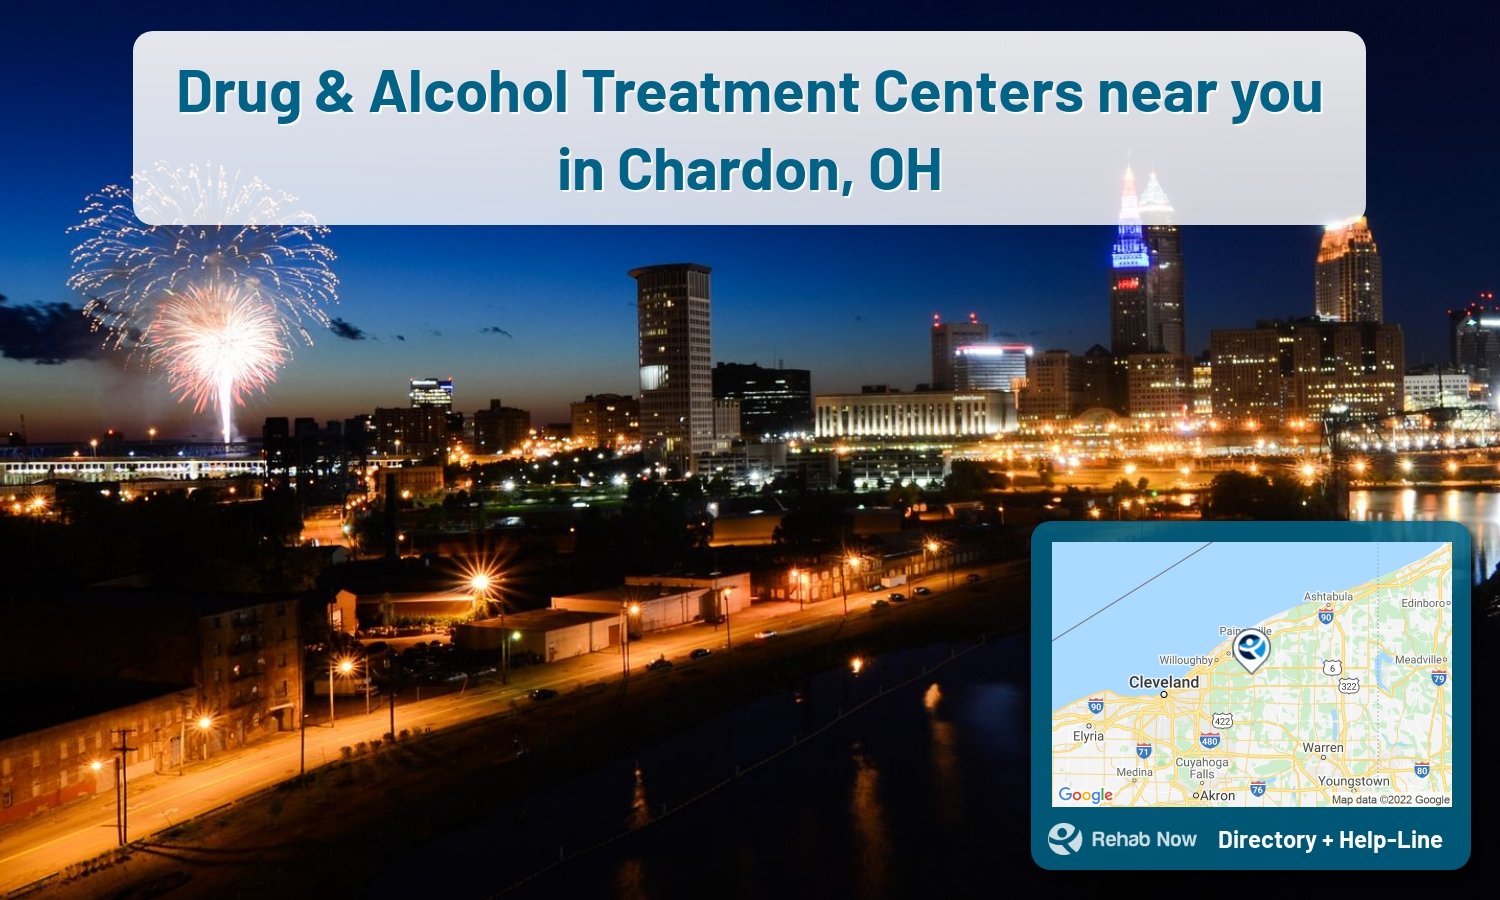 Chardon, OH Treatment Centers. Find drug rehab in Chardon, Ohio, or detox and treatment programs. Get the right help now!